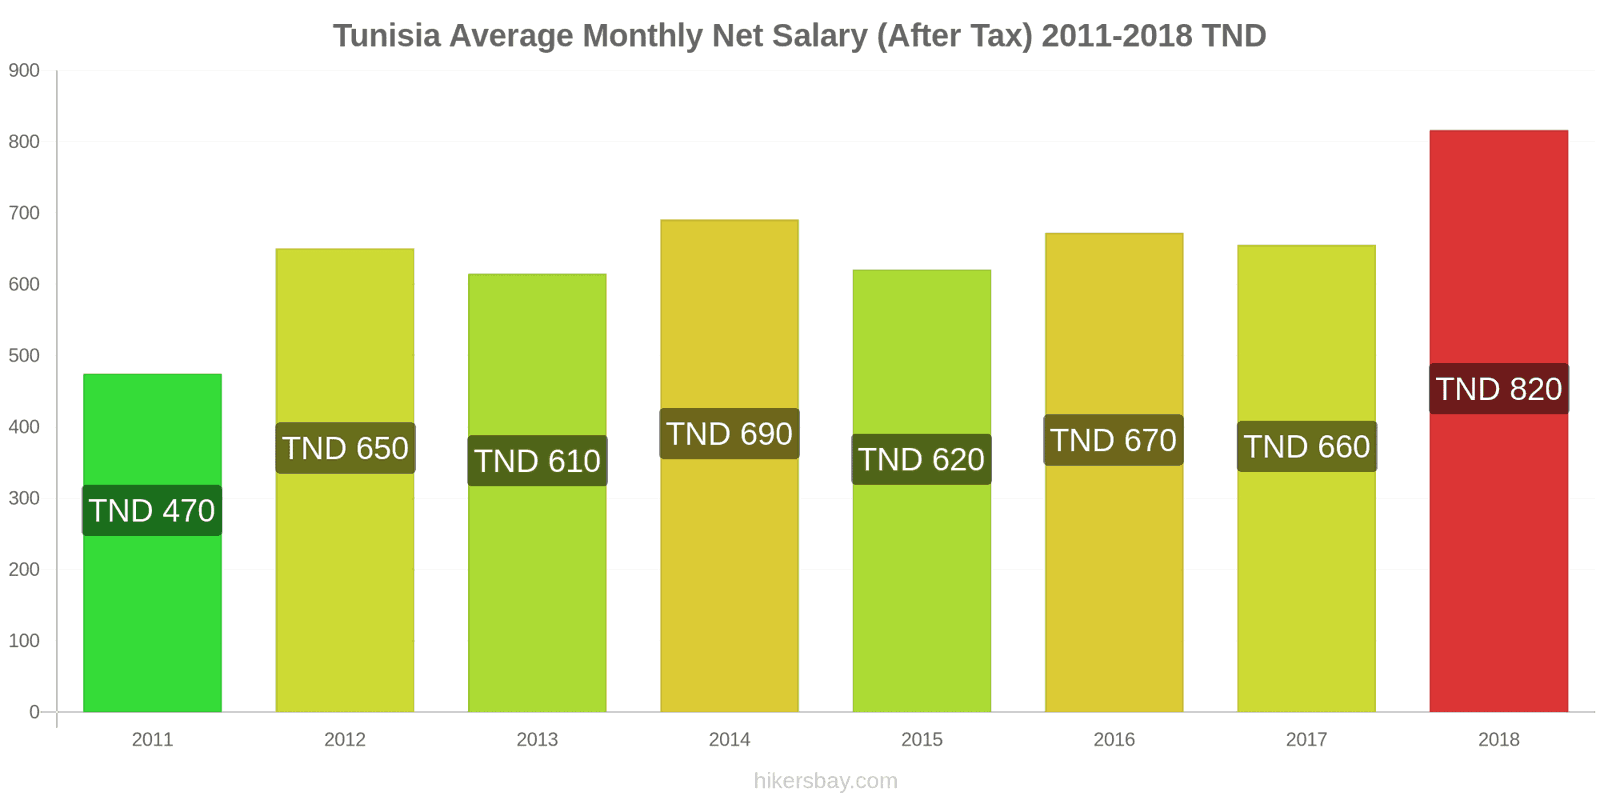 Tunisia price changes Average Monthly Net Salary (After Tax) hikersbay.com